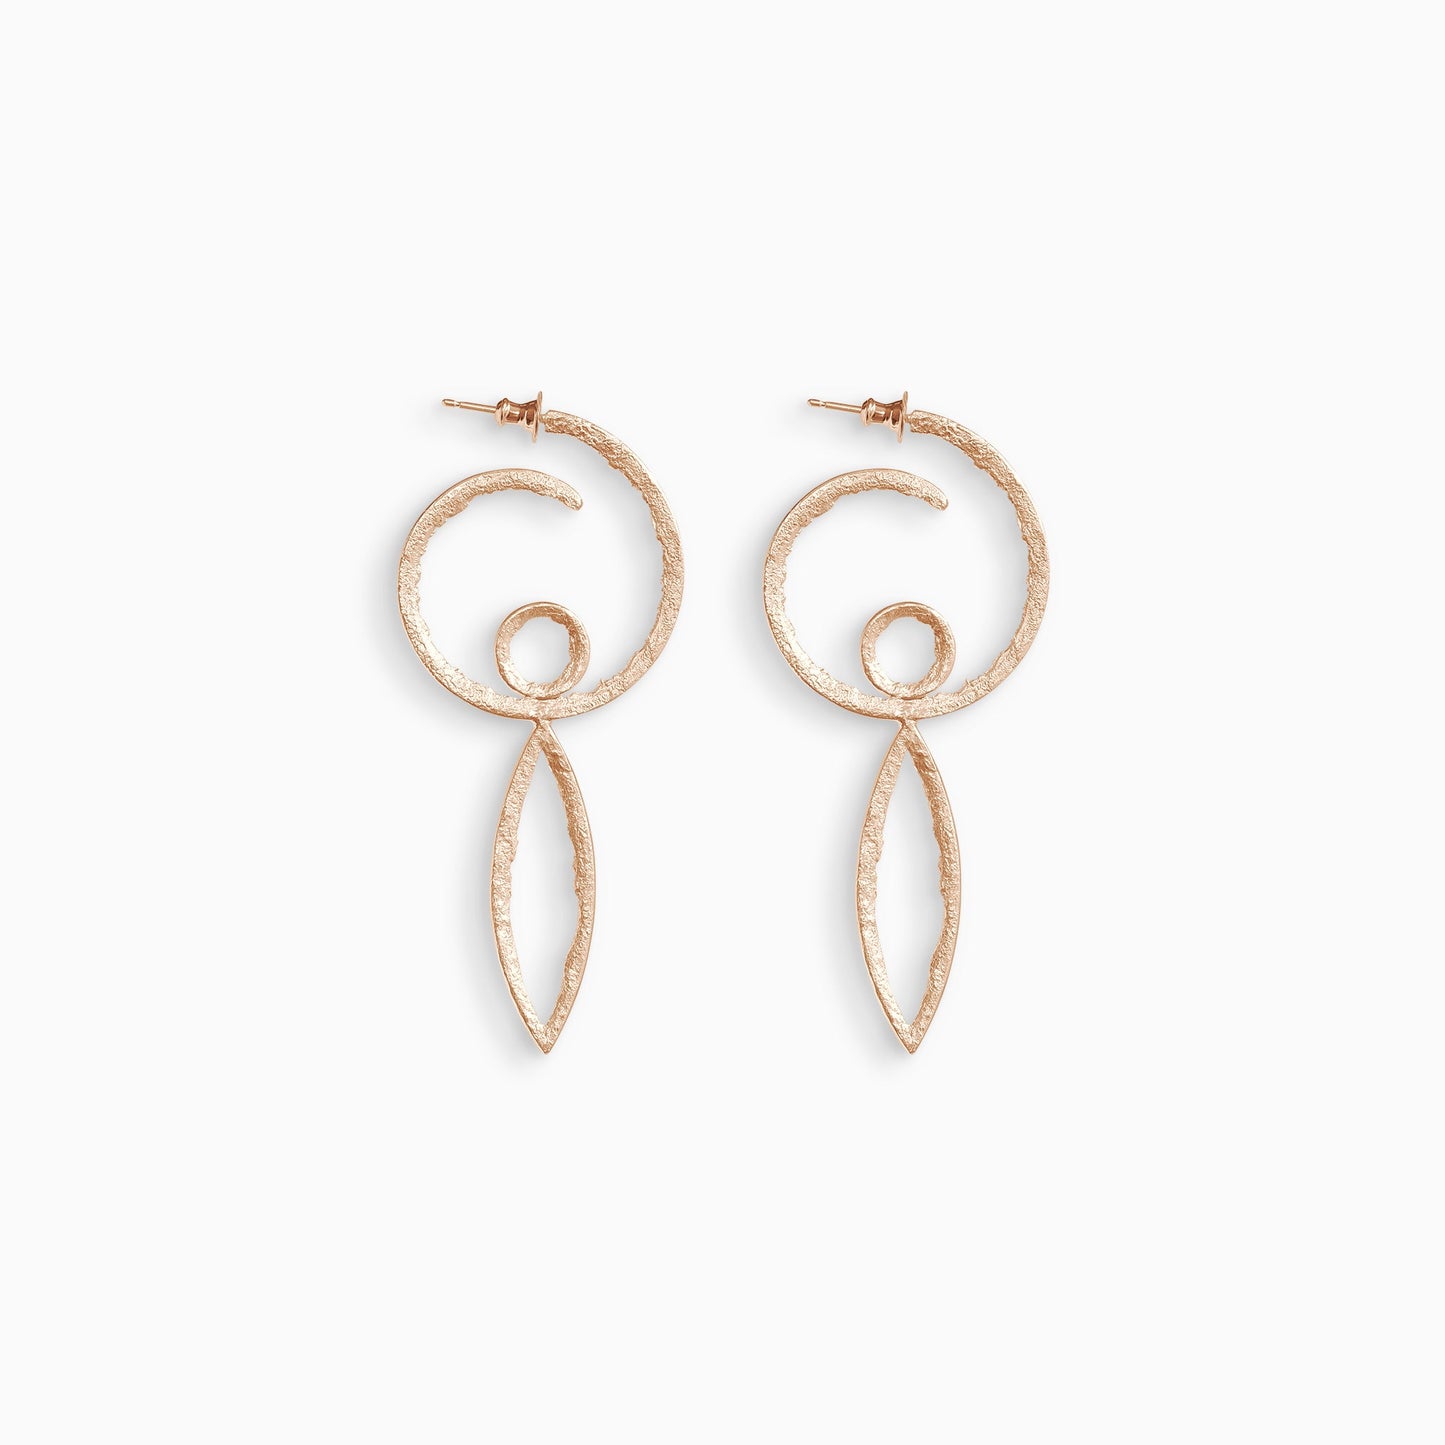 A pair of 18ct Fairtrade rose gold  hoop earrings in the form of a swirl with a stud ear fastening. Inside the bottom of the hoop is a small circle shape and below the hoop there is a long lozenge shape. These open shapes have a strong organic texture and are smooth on the outside edge with fragmented inside edges. 36mm outside diameter